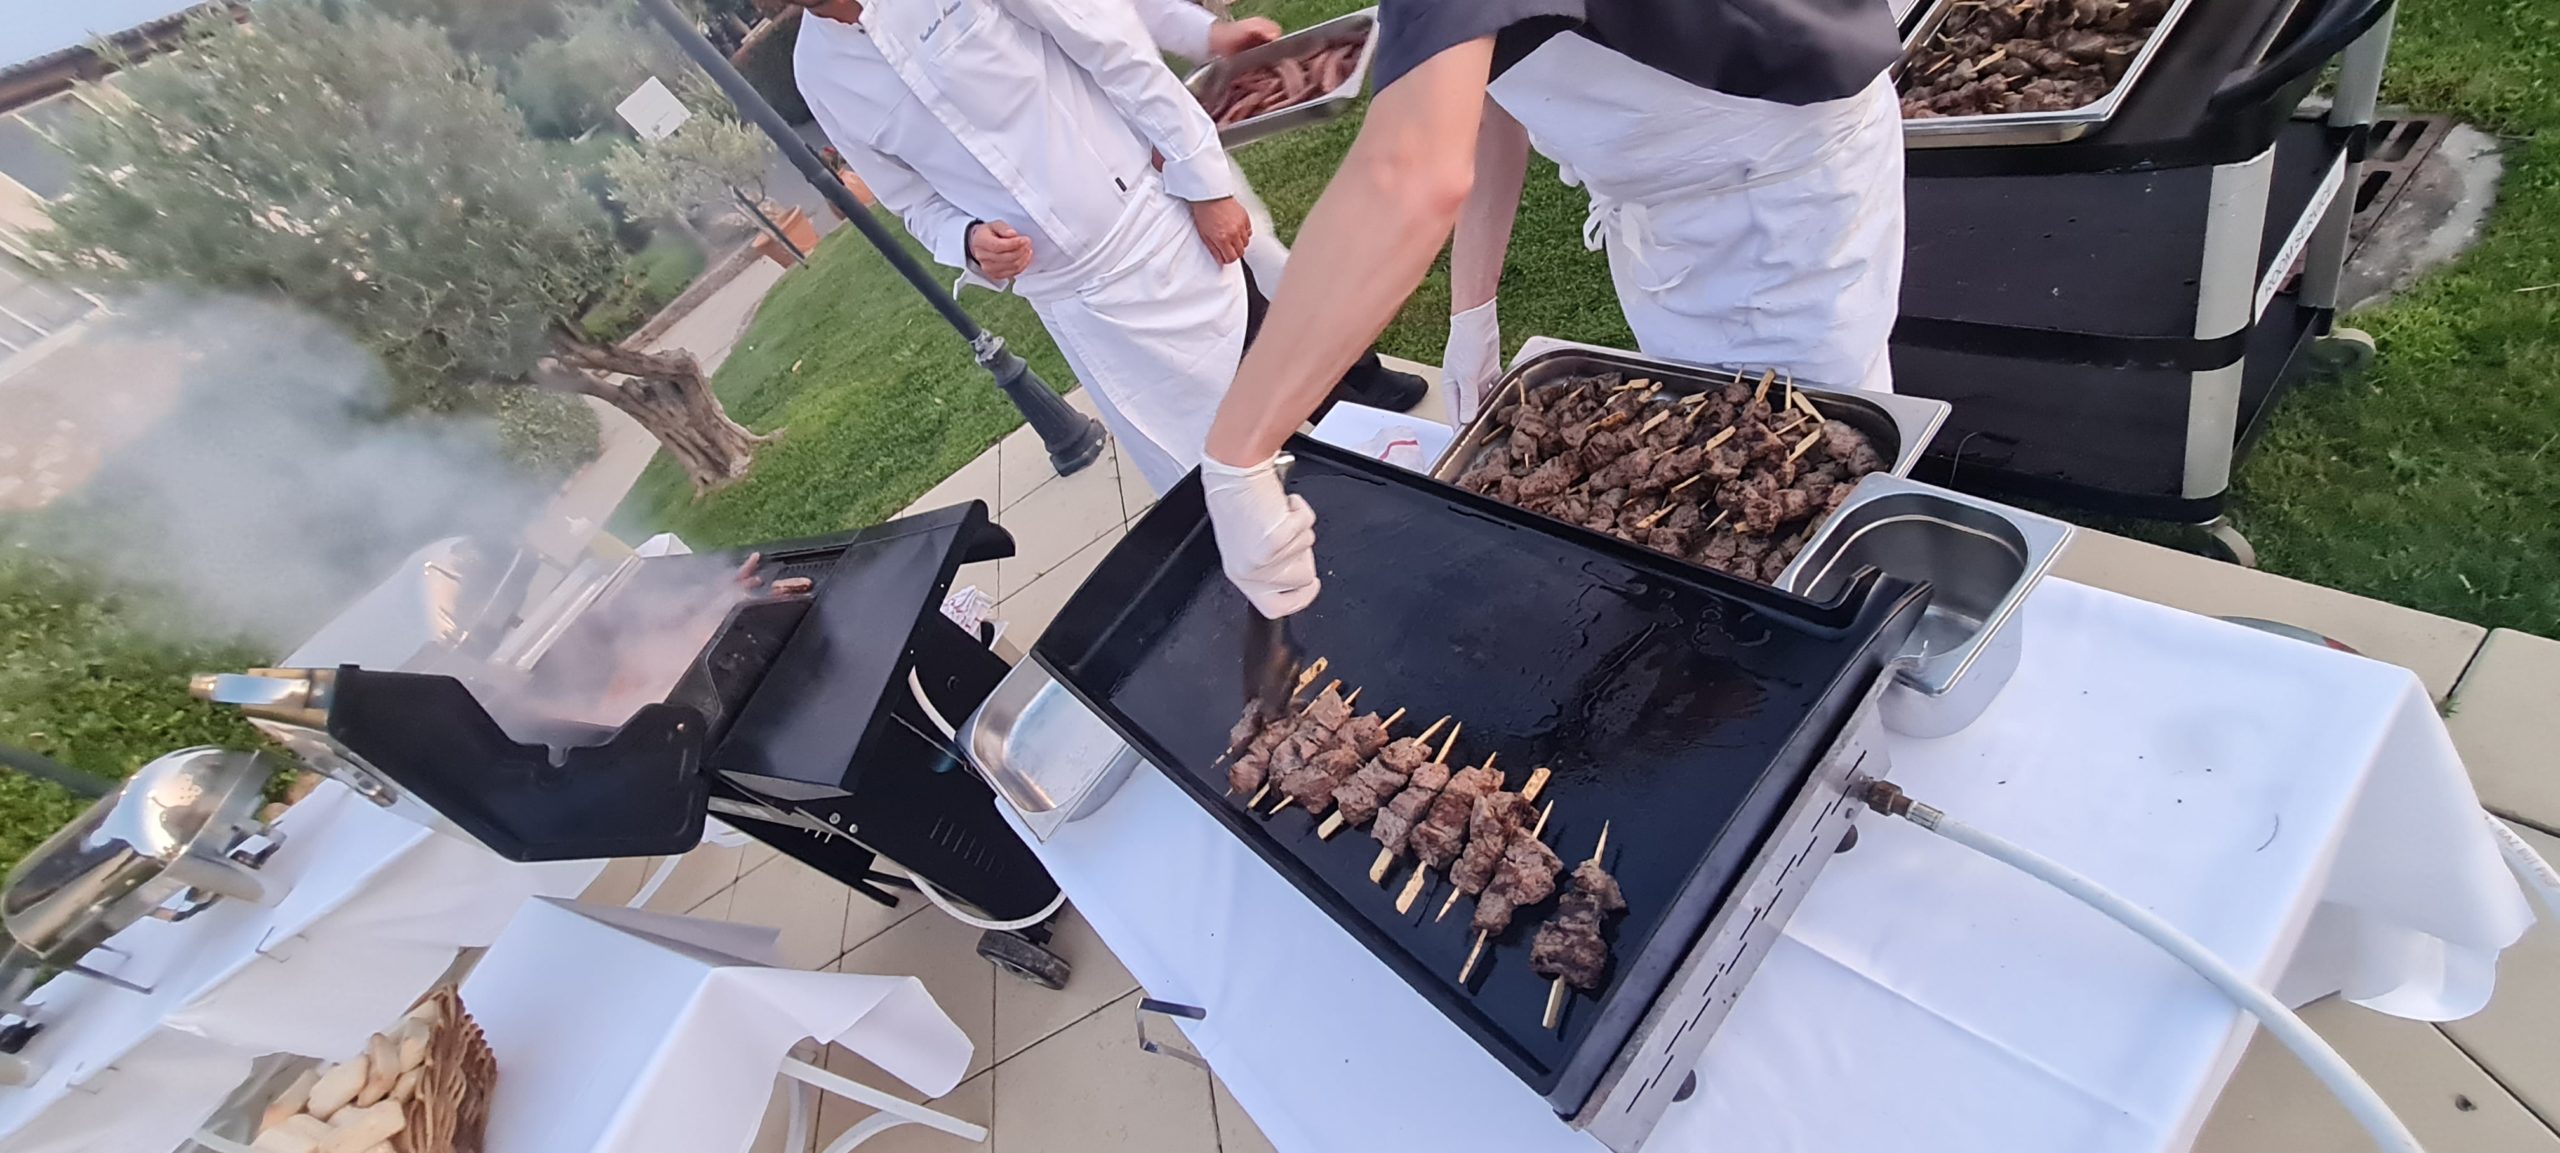 Buffet Barbecue By LUDIMUS Creative Events: